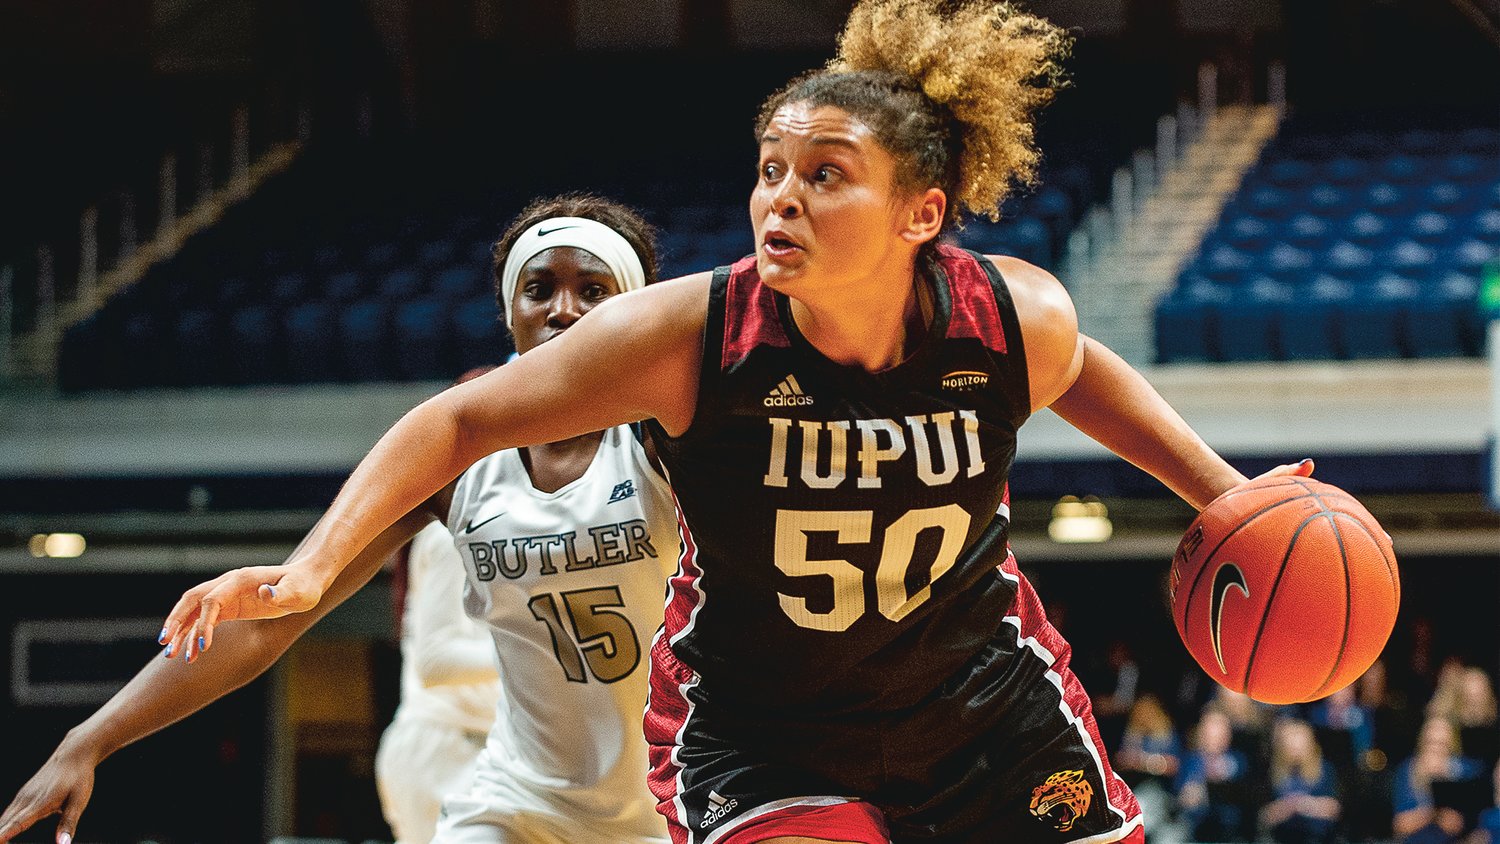 Macee Williams is the two-time defending Horizon League Women's basketball player of the year. She will try and lead IUPUI to a second-straight conference title this upcoming season.